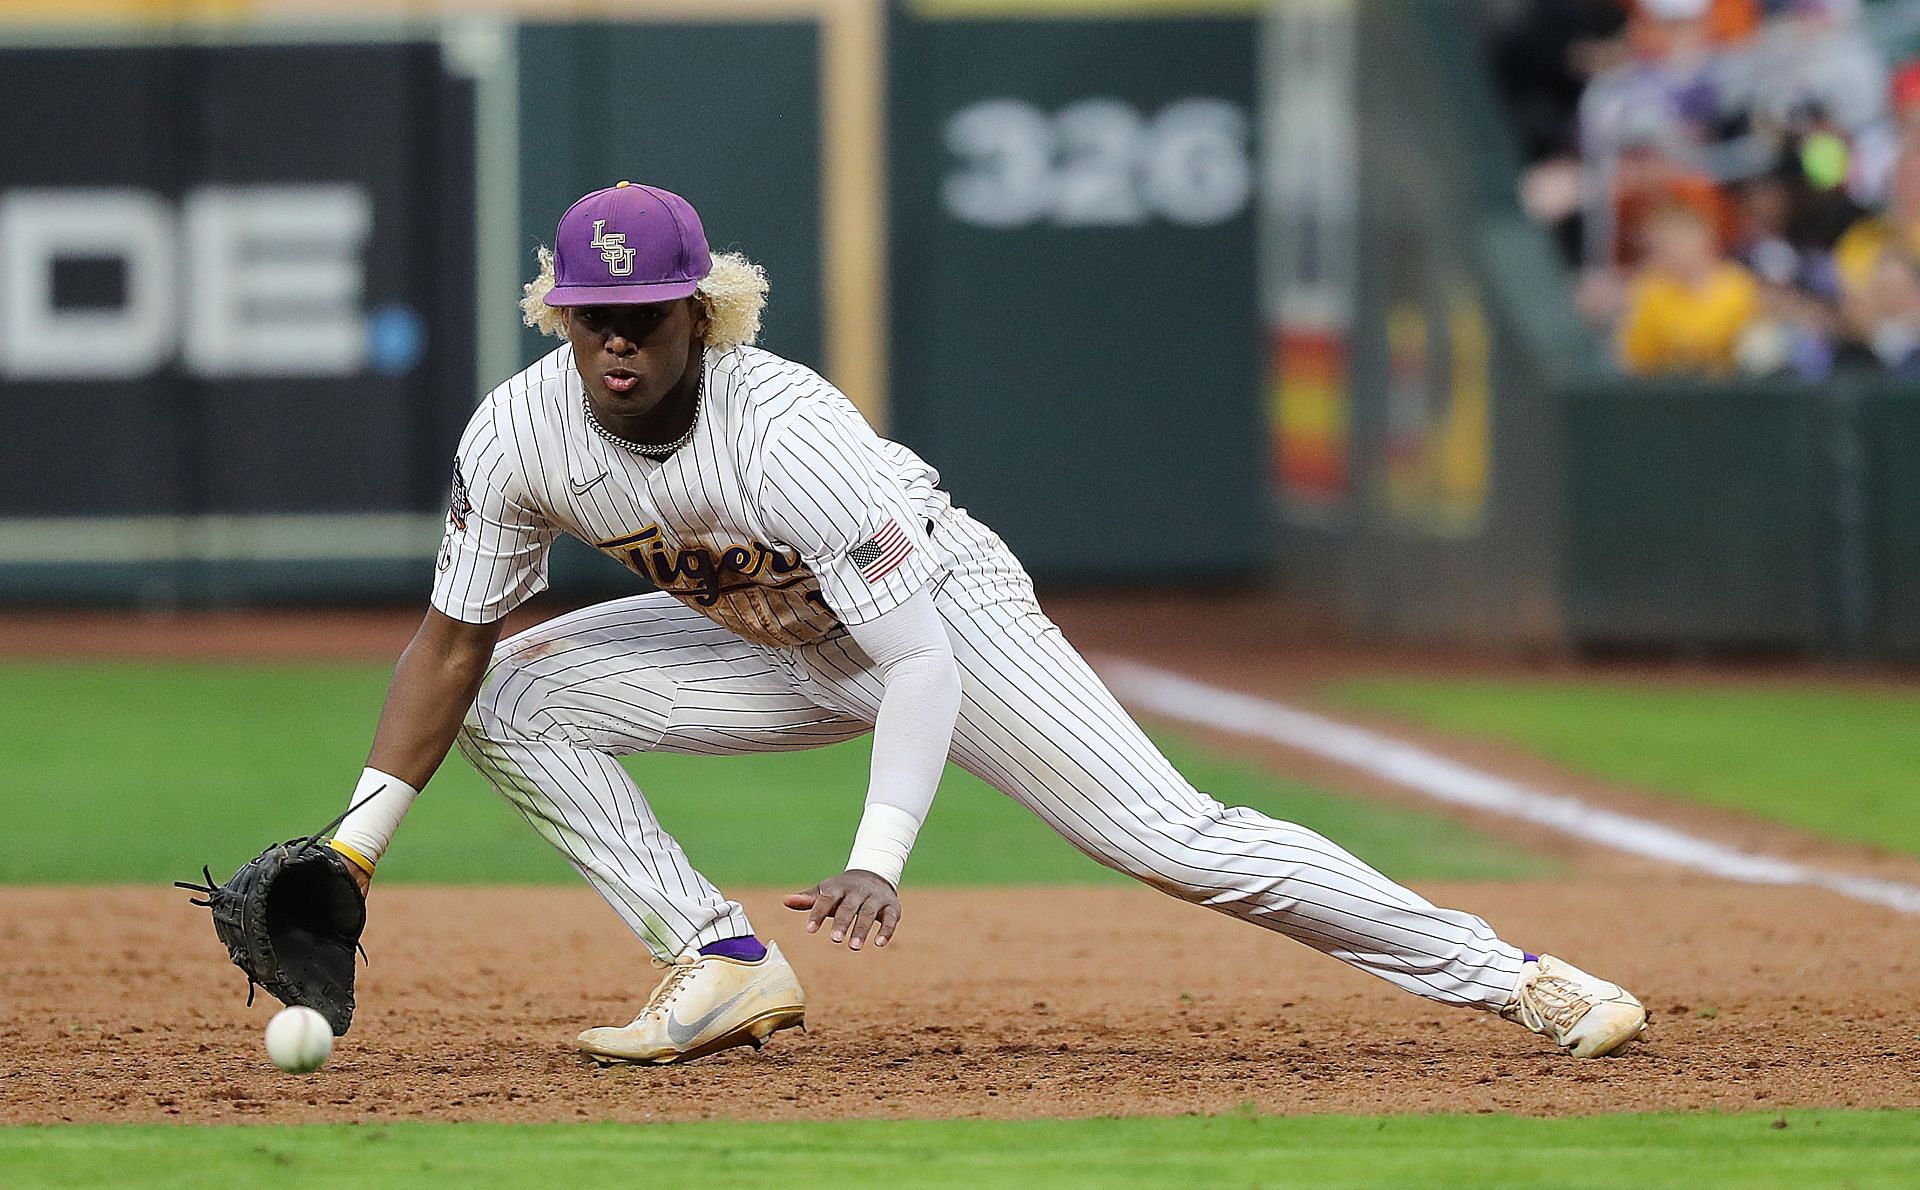 Tre&#039; Morgan was drafted from LSU baseball